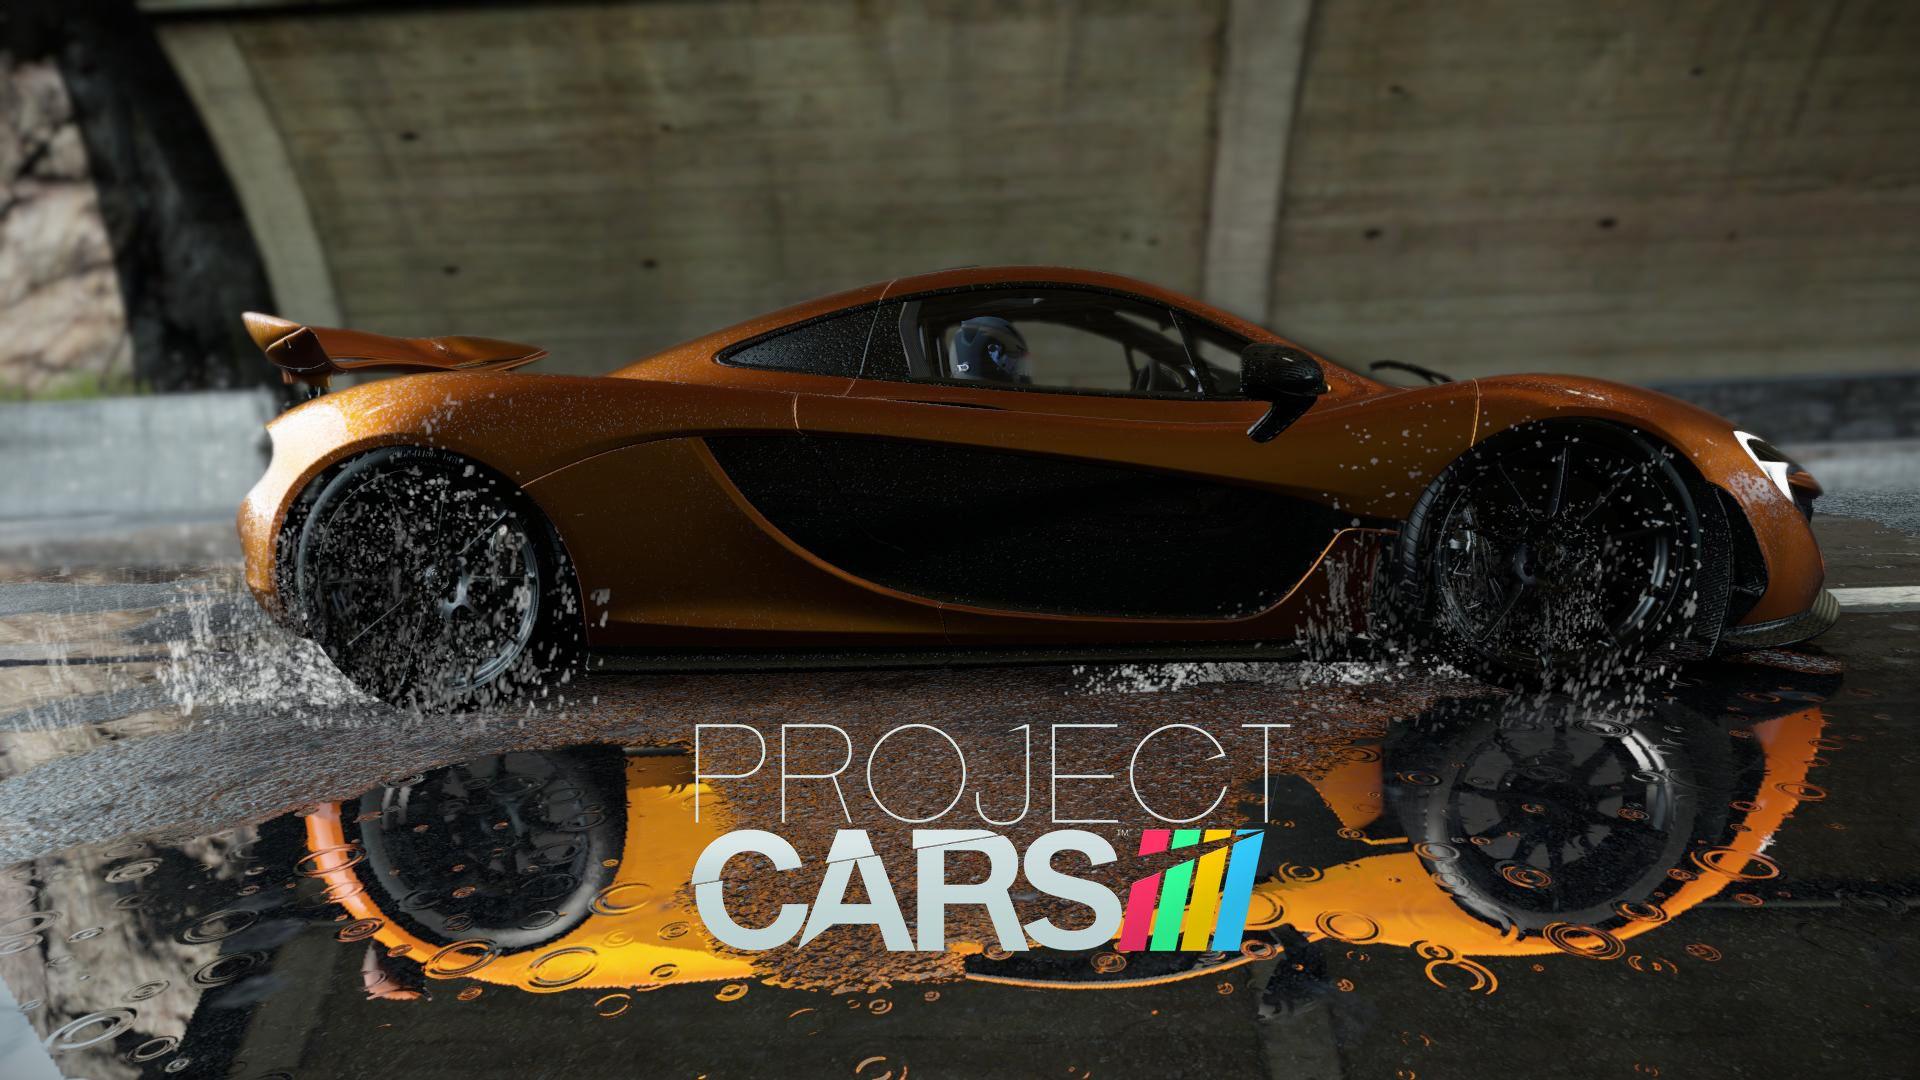 720p project cars background